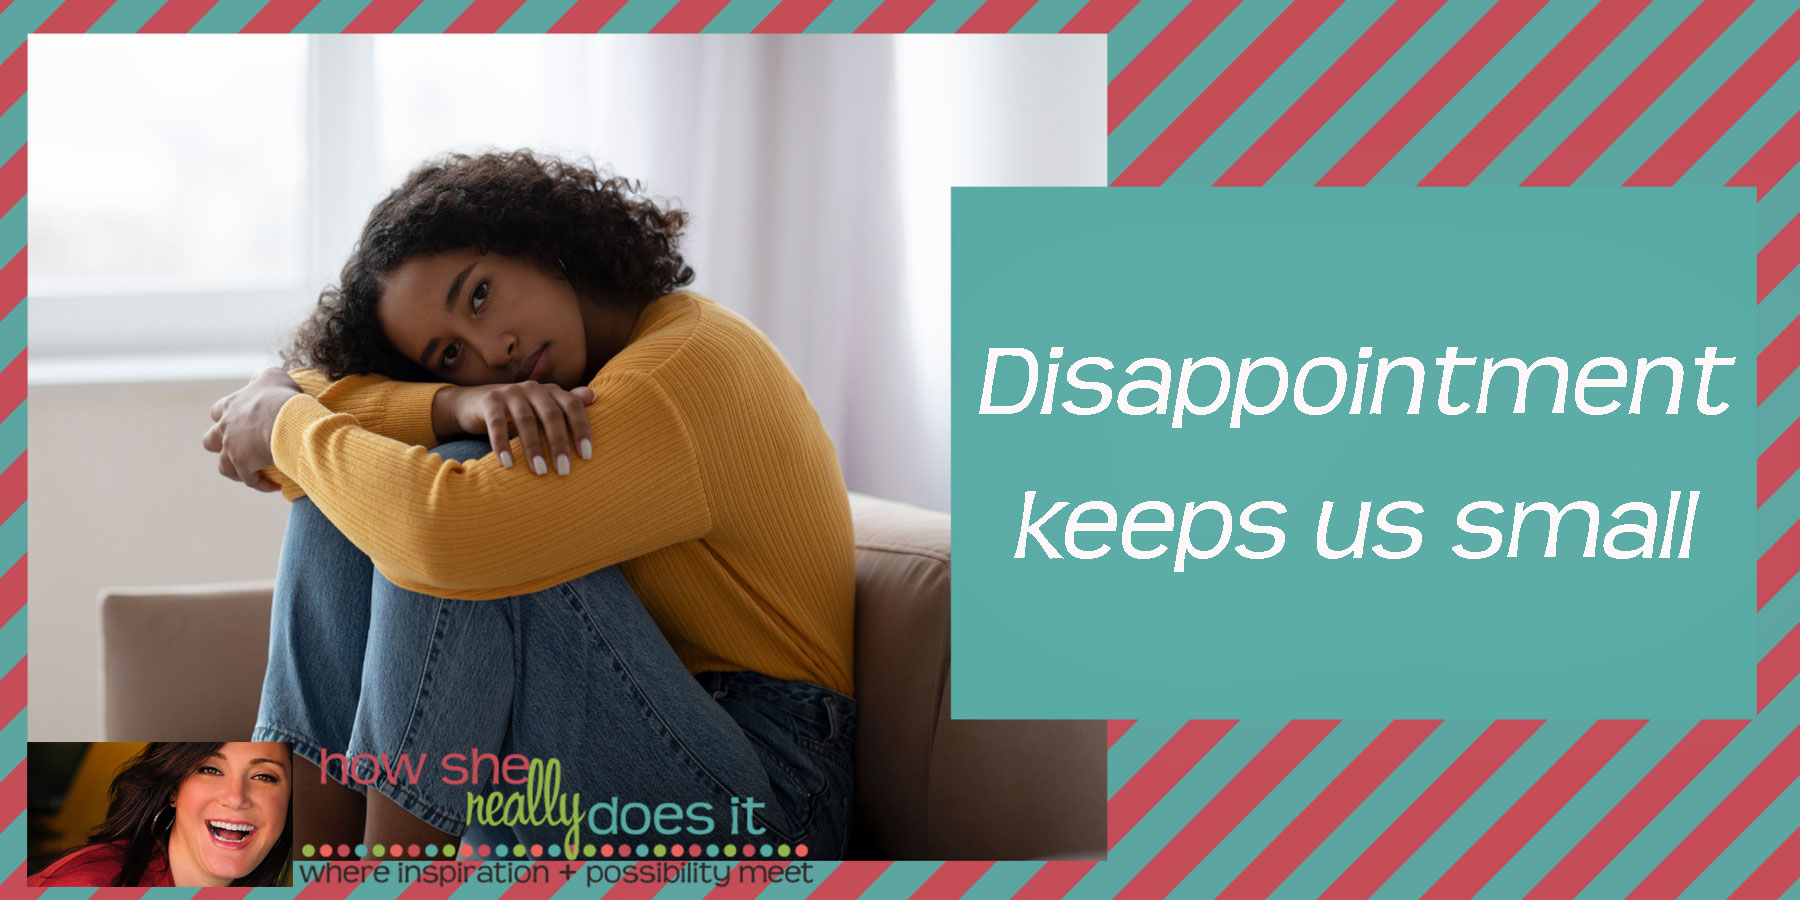 How She Really Does It | Disappointment keeps us small